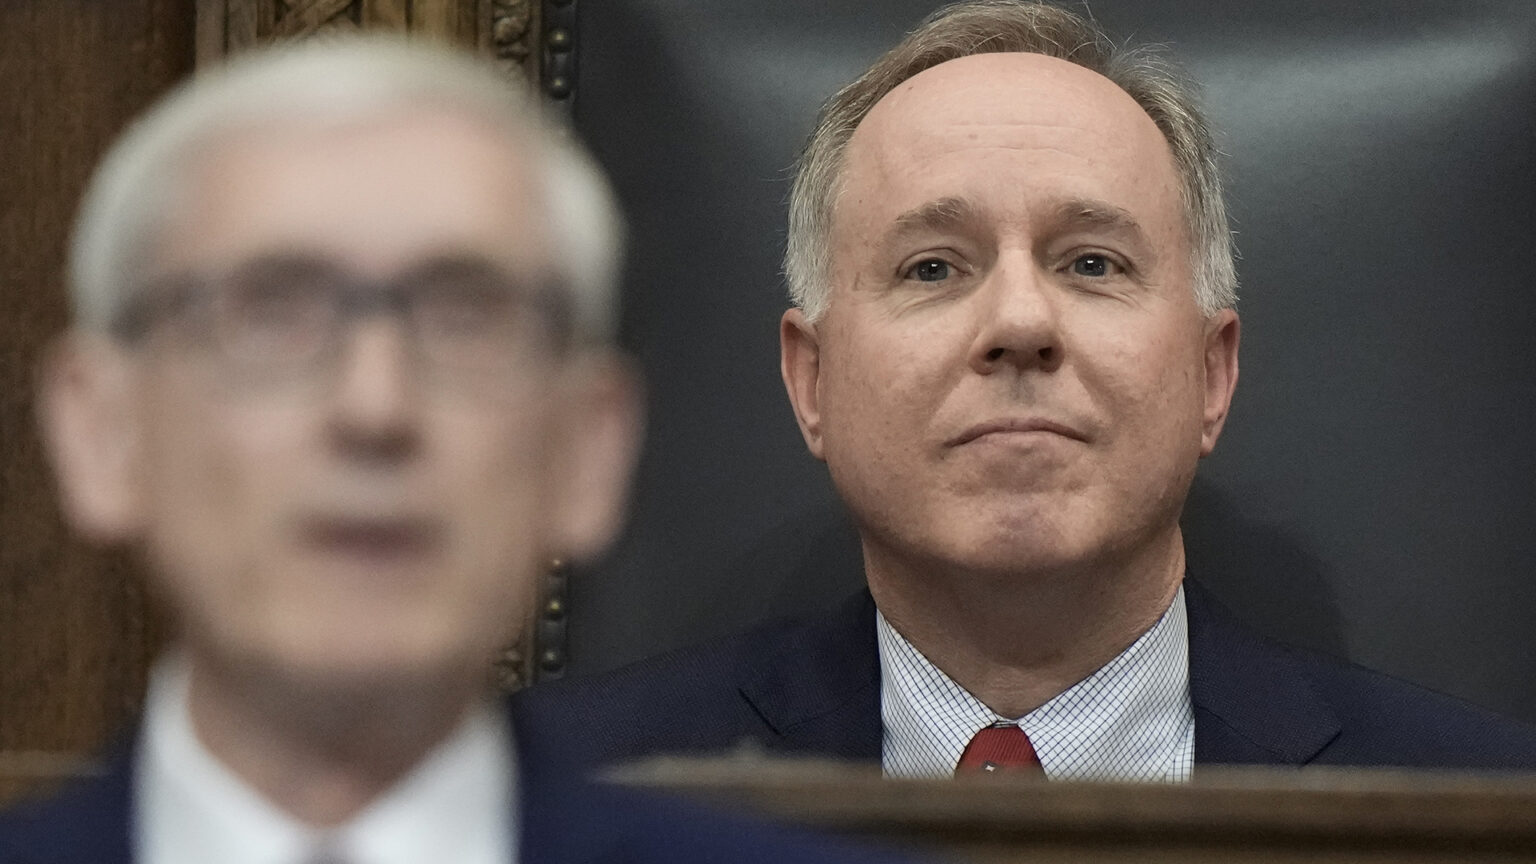 Robin Vos is seated in a high-backed chair behind Tony Evers, who is speaking (and out of focus) in the foreground.